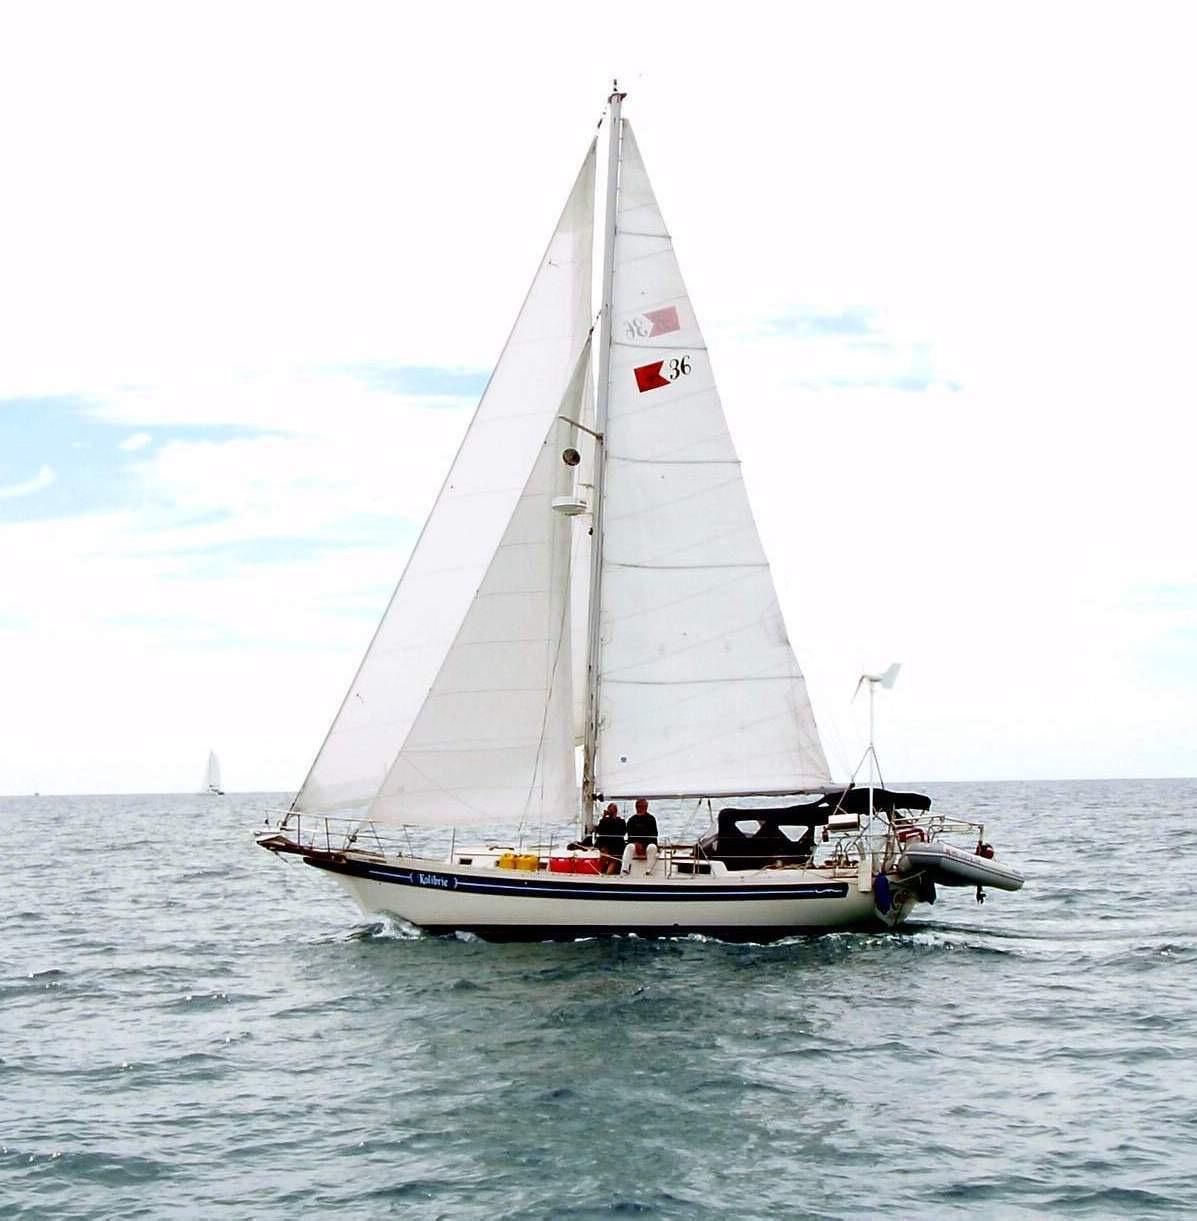 bayfield sailboats for sale by owner